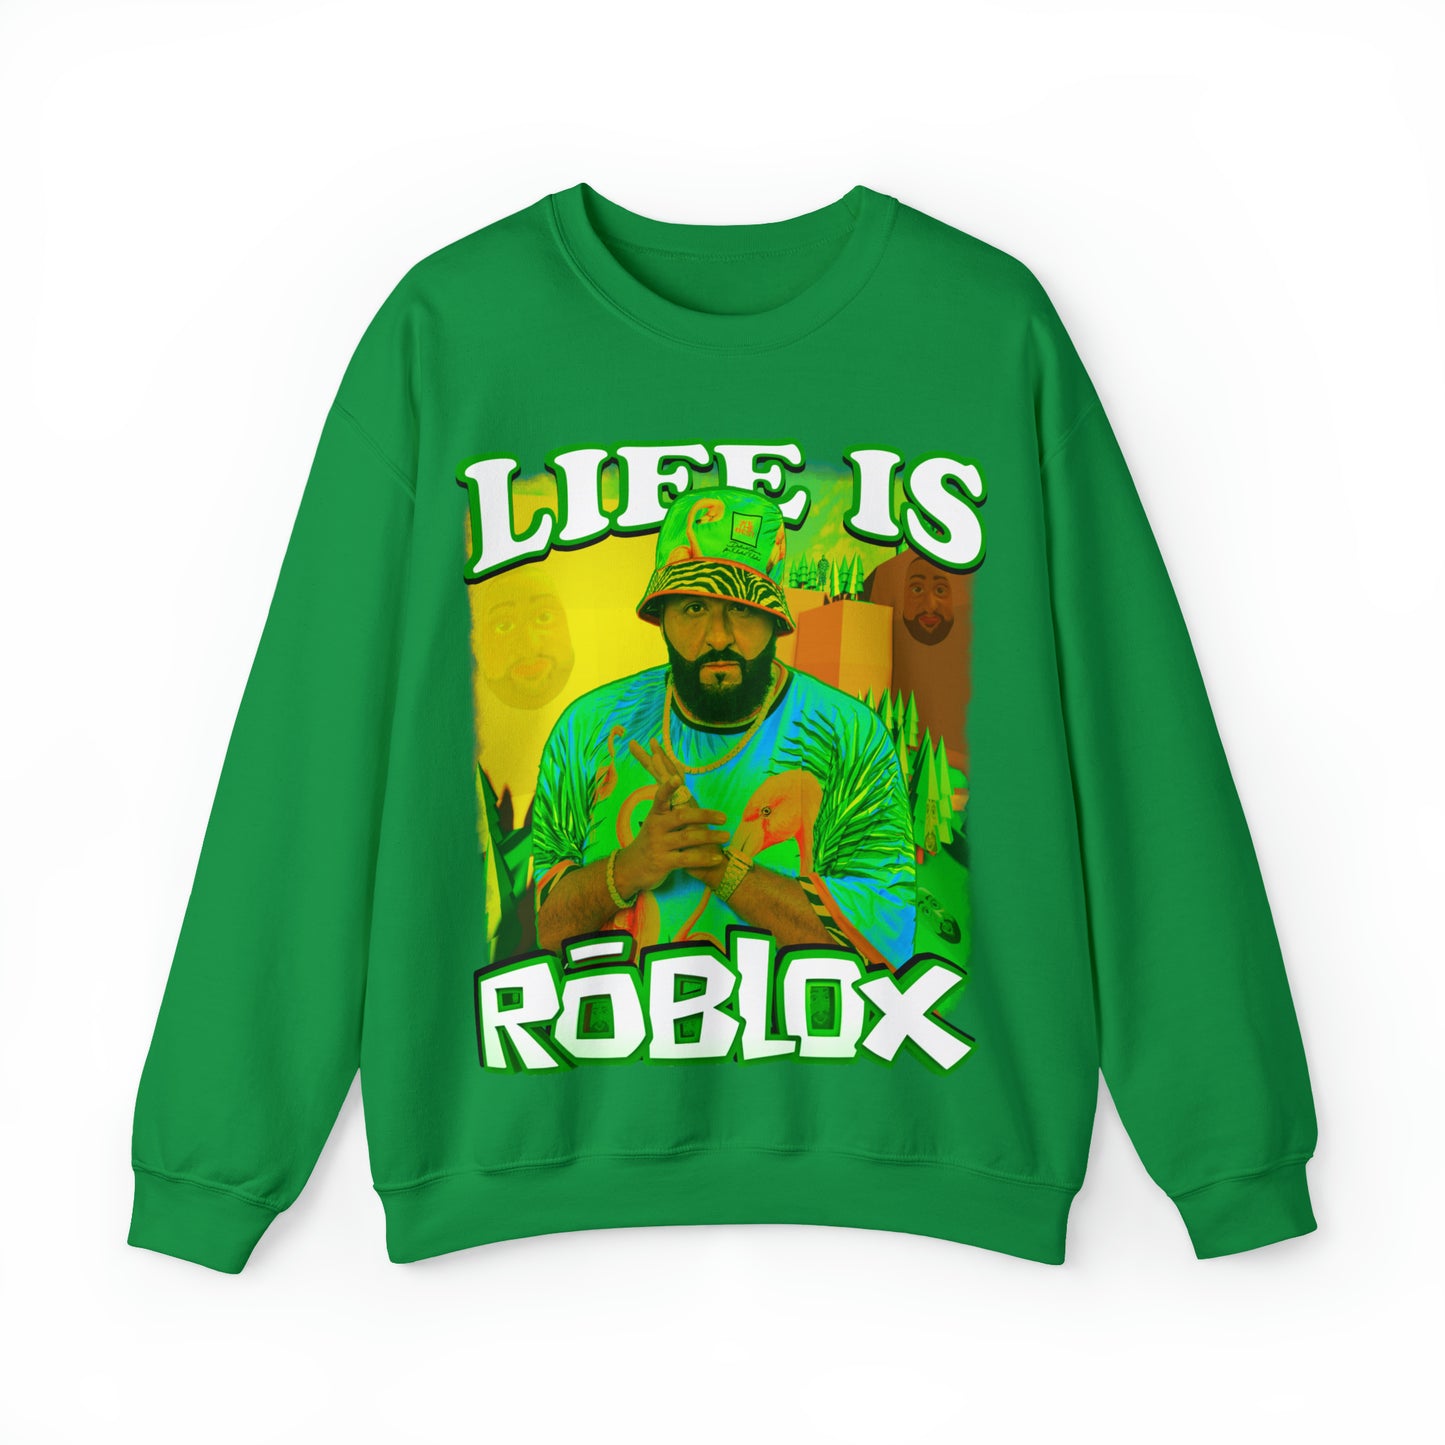 LIFE IS ROBLOX